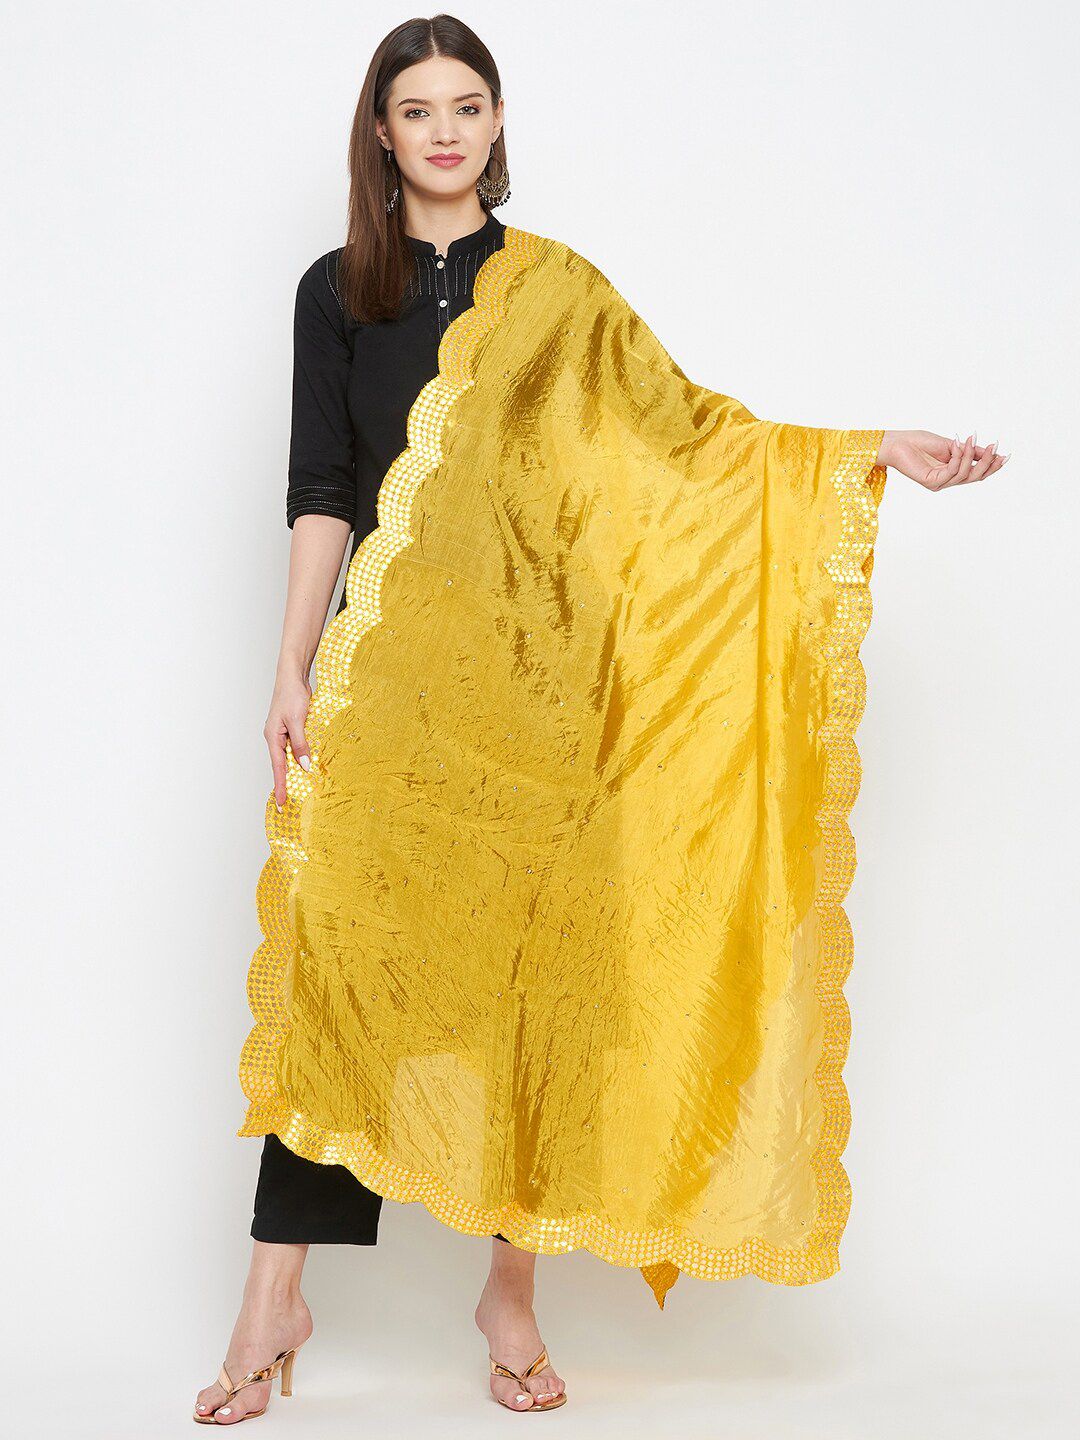 Clora Creation Yellow Embroidered Dupatta with Beads and Stones Price in India